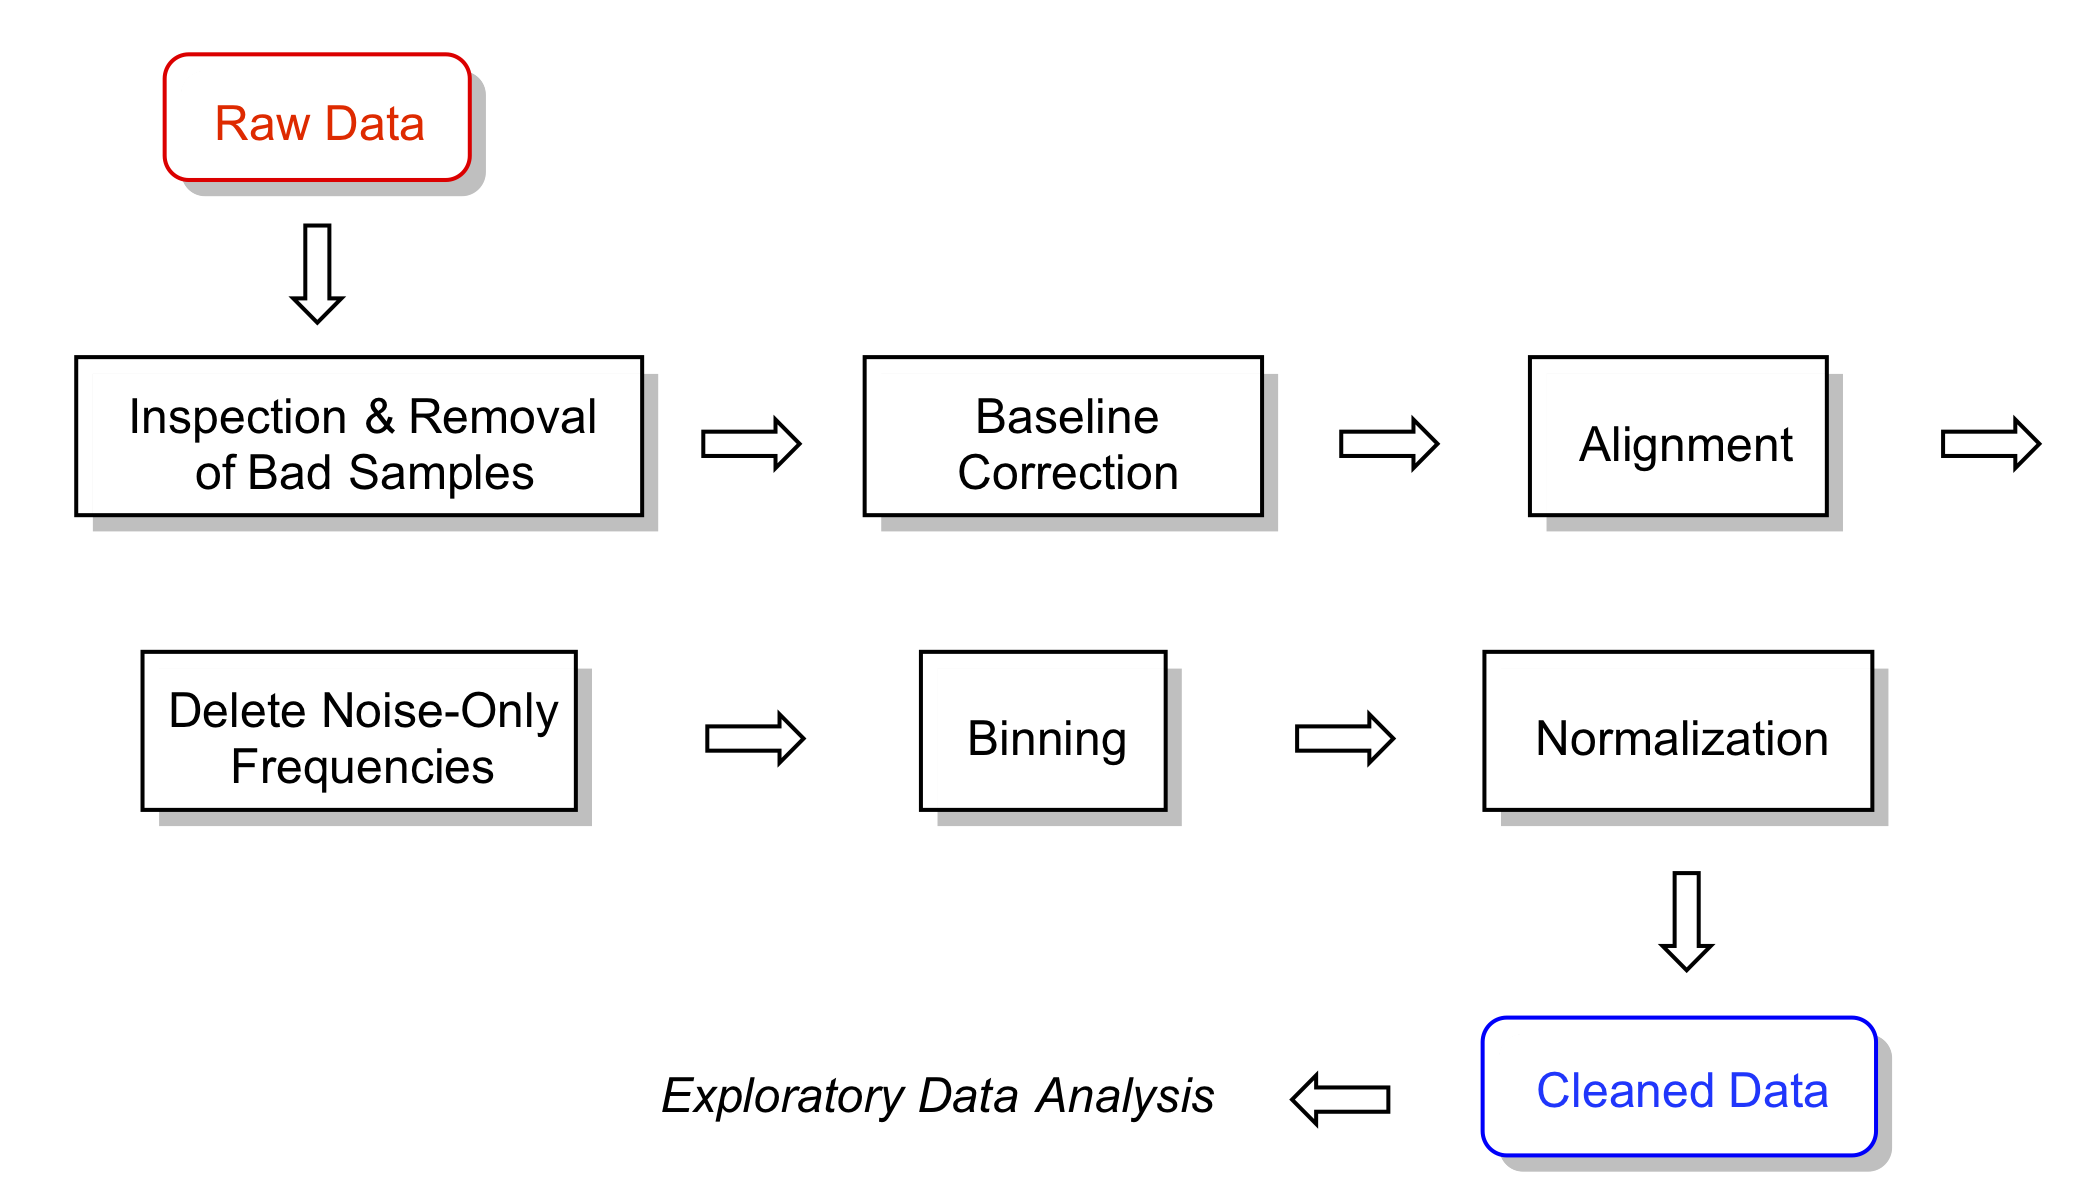 A typical workflow.  For a given data set, some steps may be omitted and the order changed.  That is part of what is meant by exploratory data analysis!